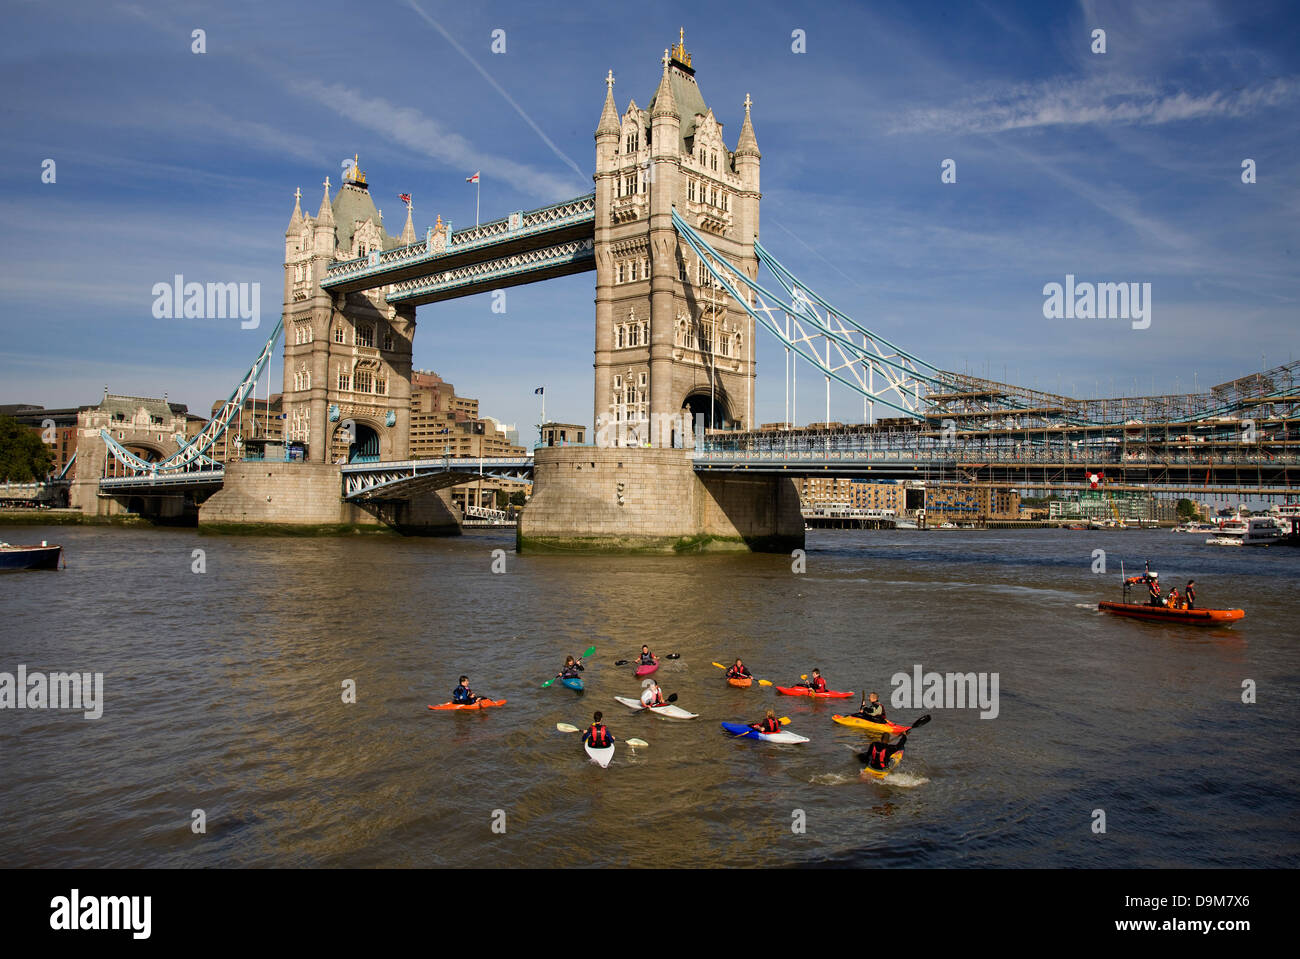 Kayaks in the Thames in front of Tower Bridge, London, England, UK Stock Photo